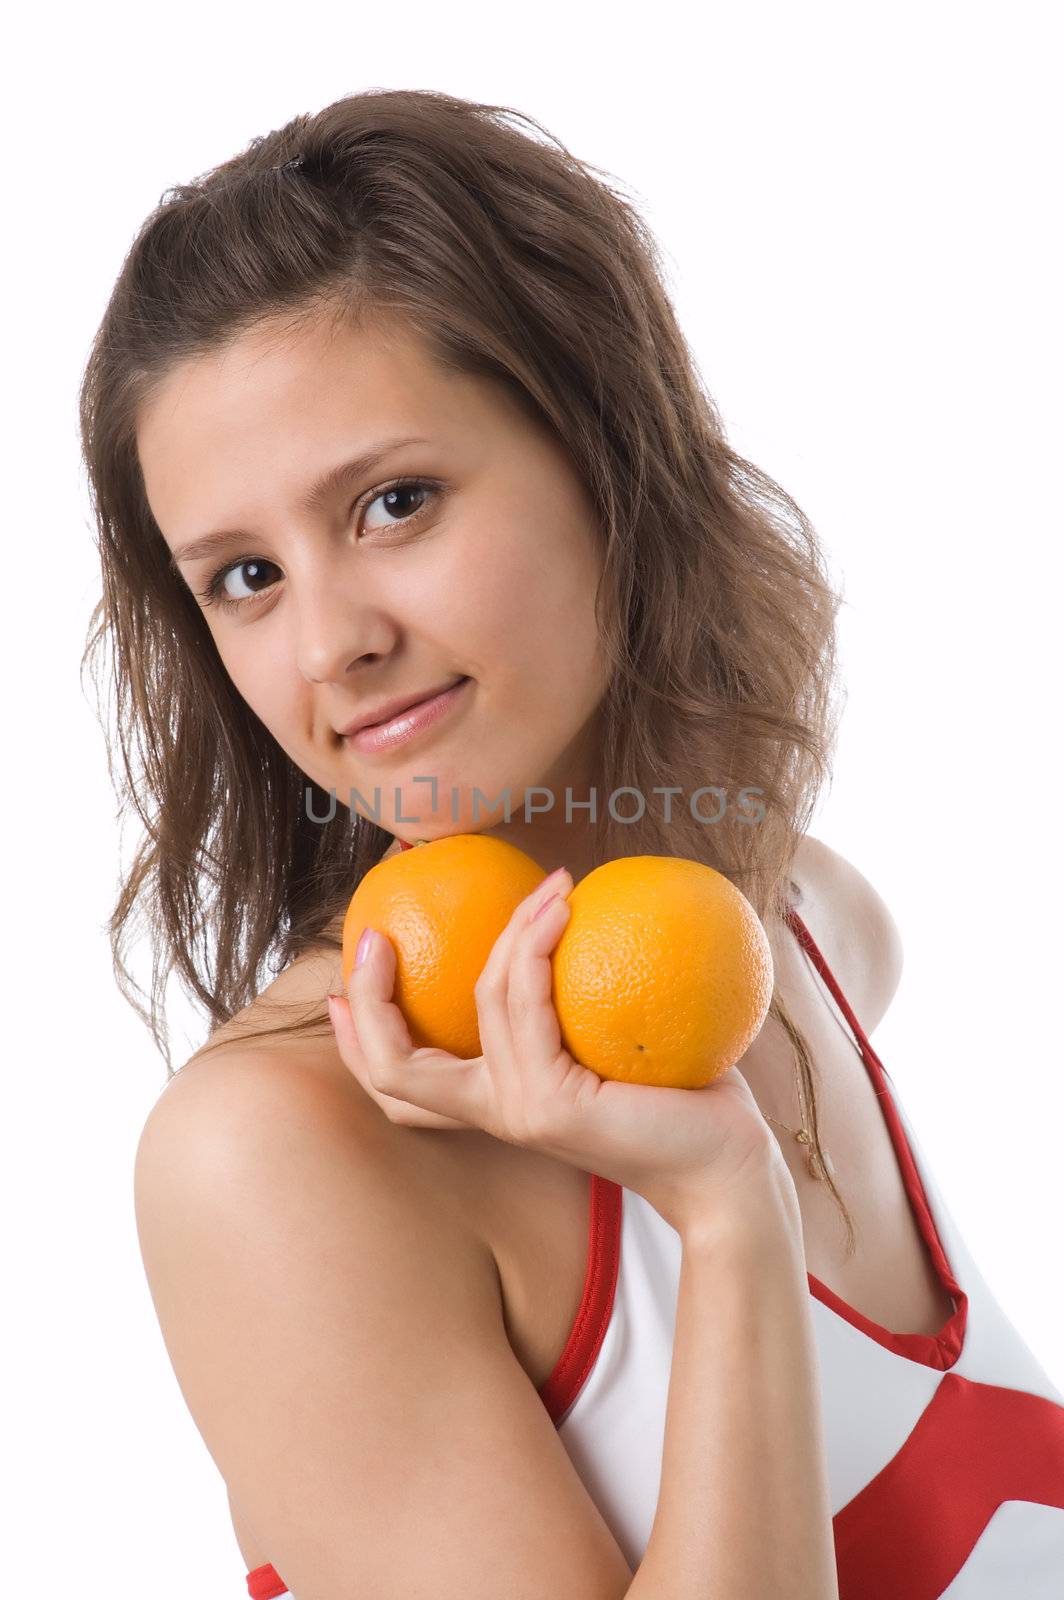 The girl with oranges by andyphoto